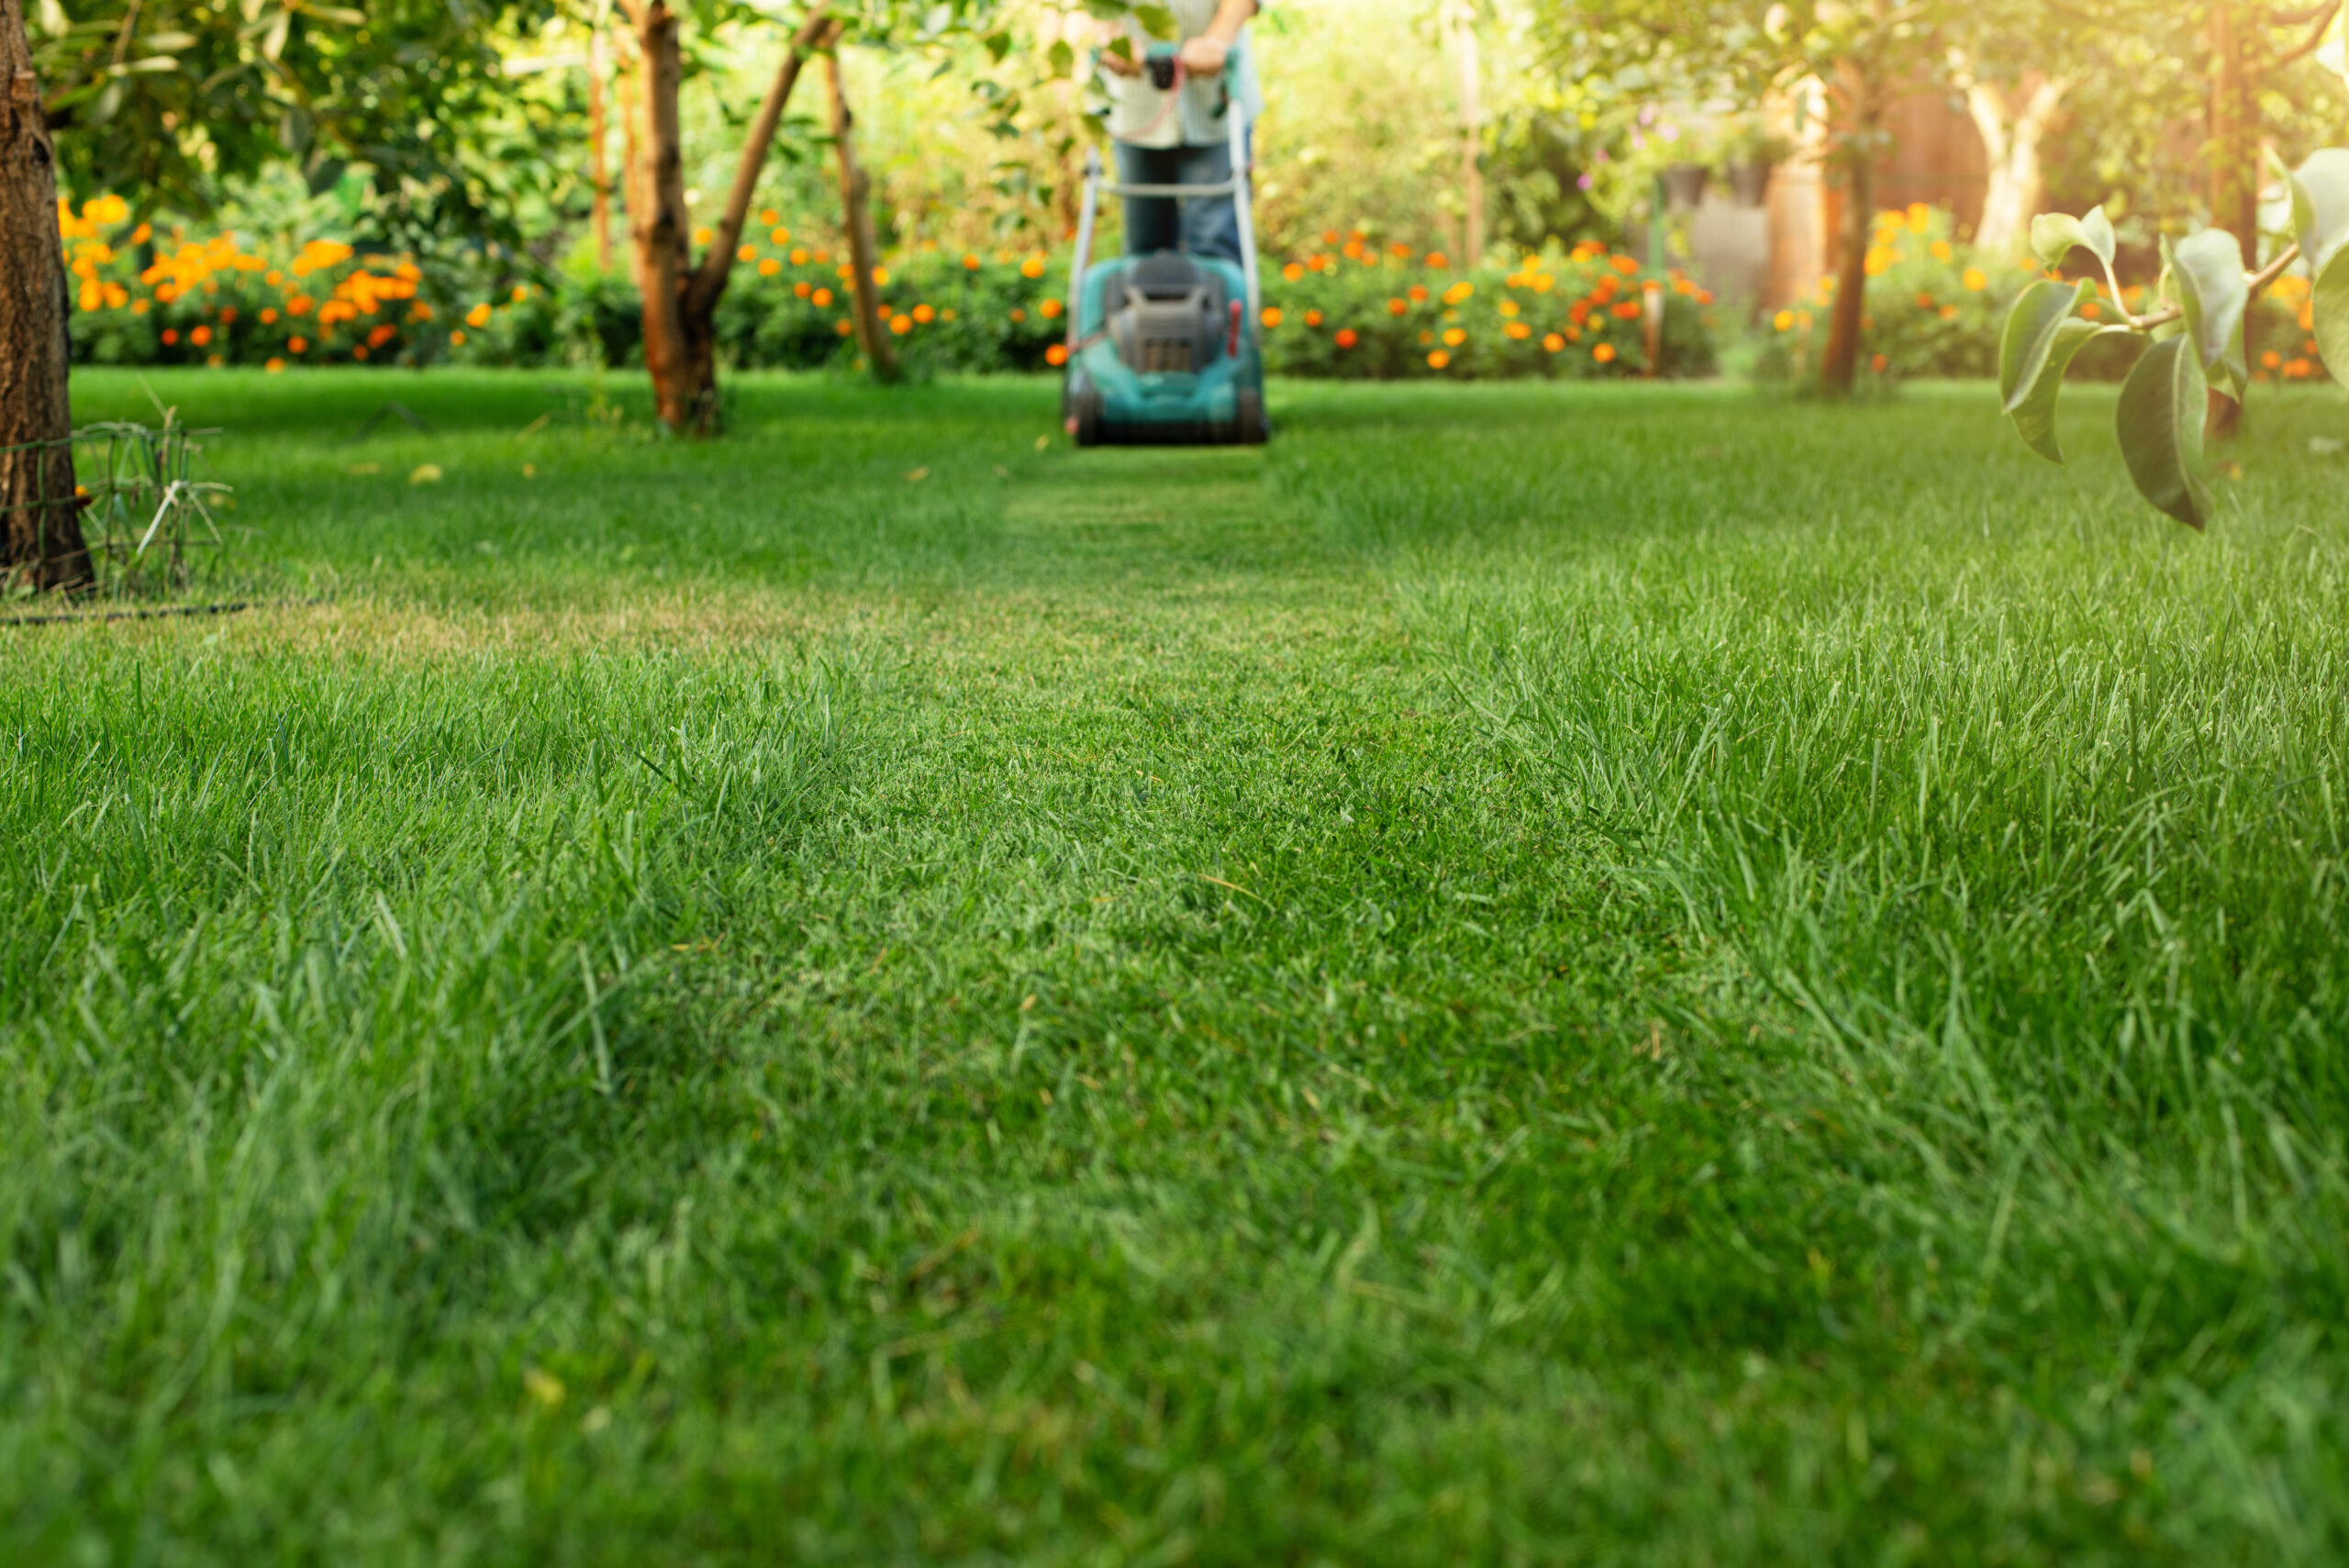 Man pushing lawn mower. Lawn care background, place for text